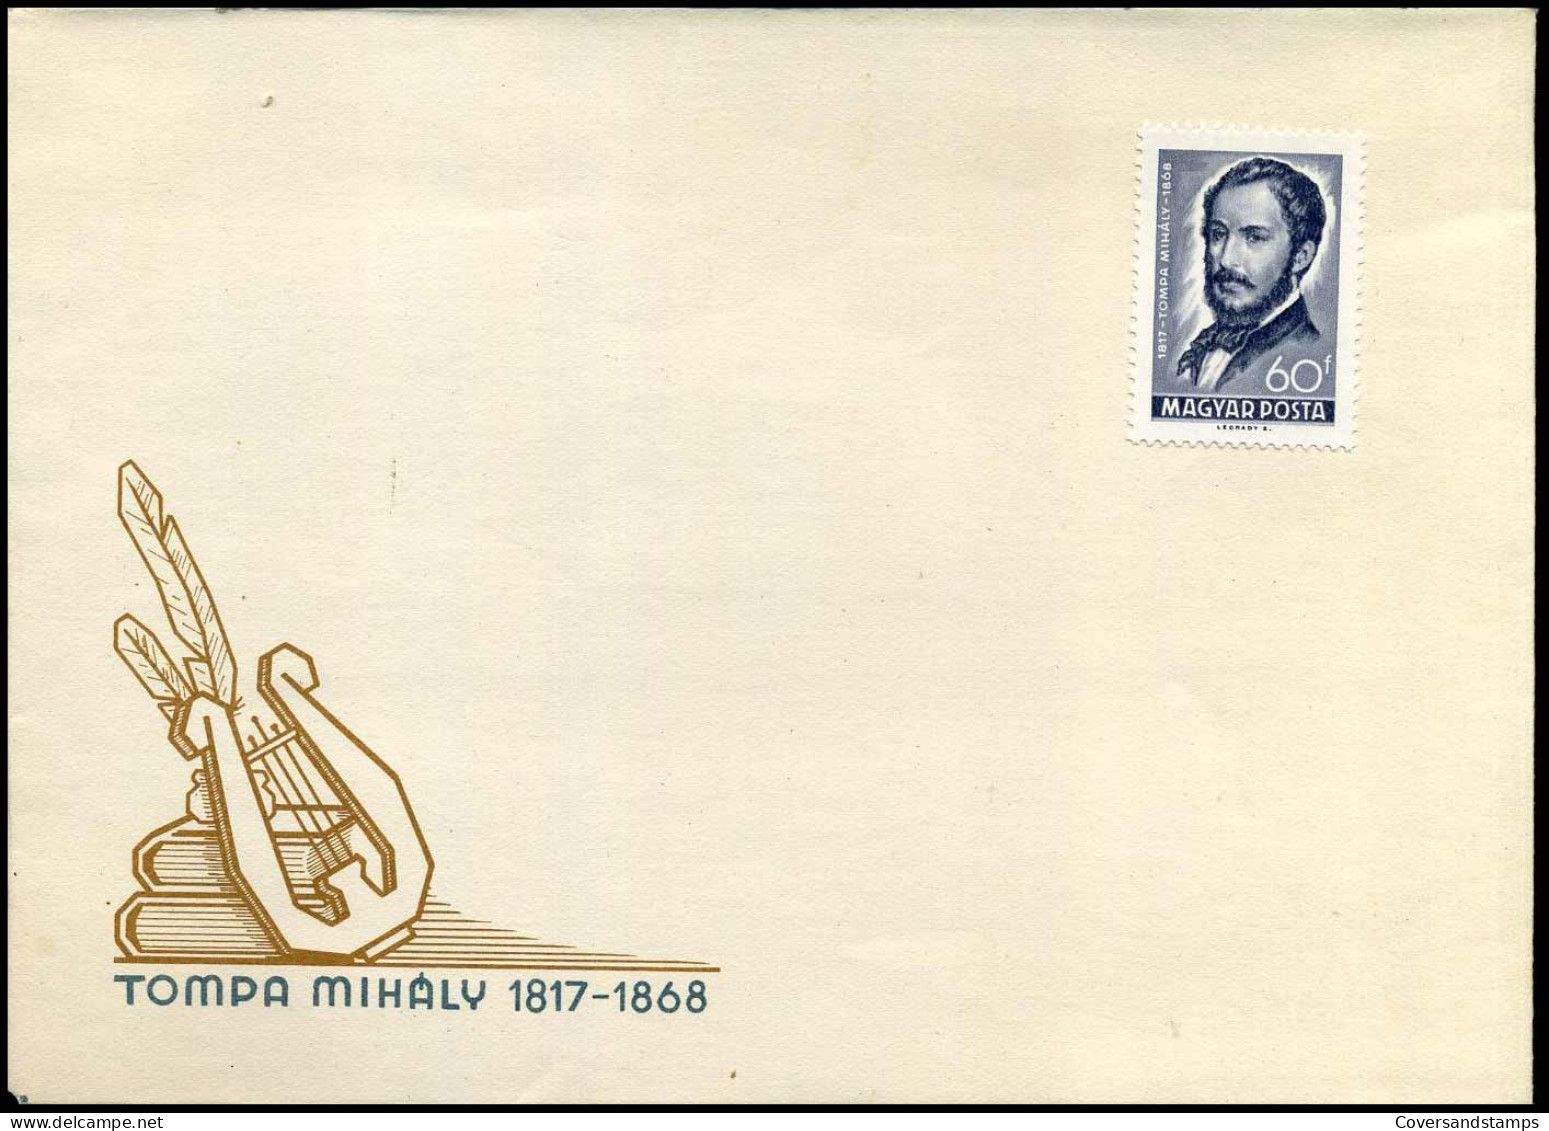 Tompa Mihaly - FDC - FDC